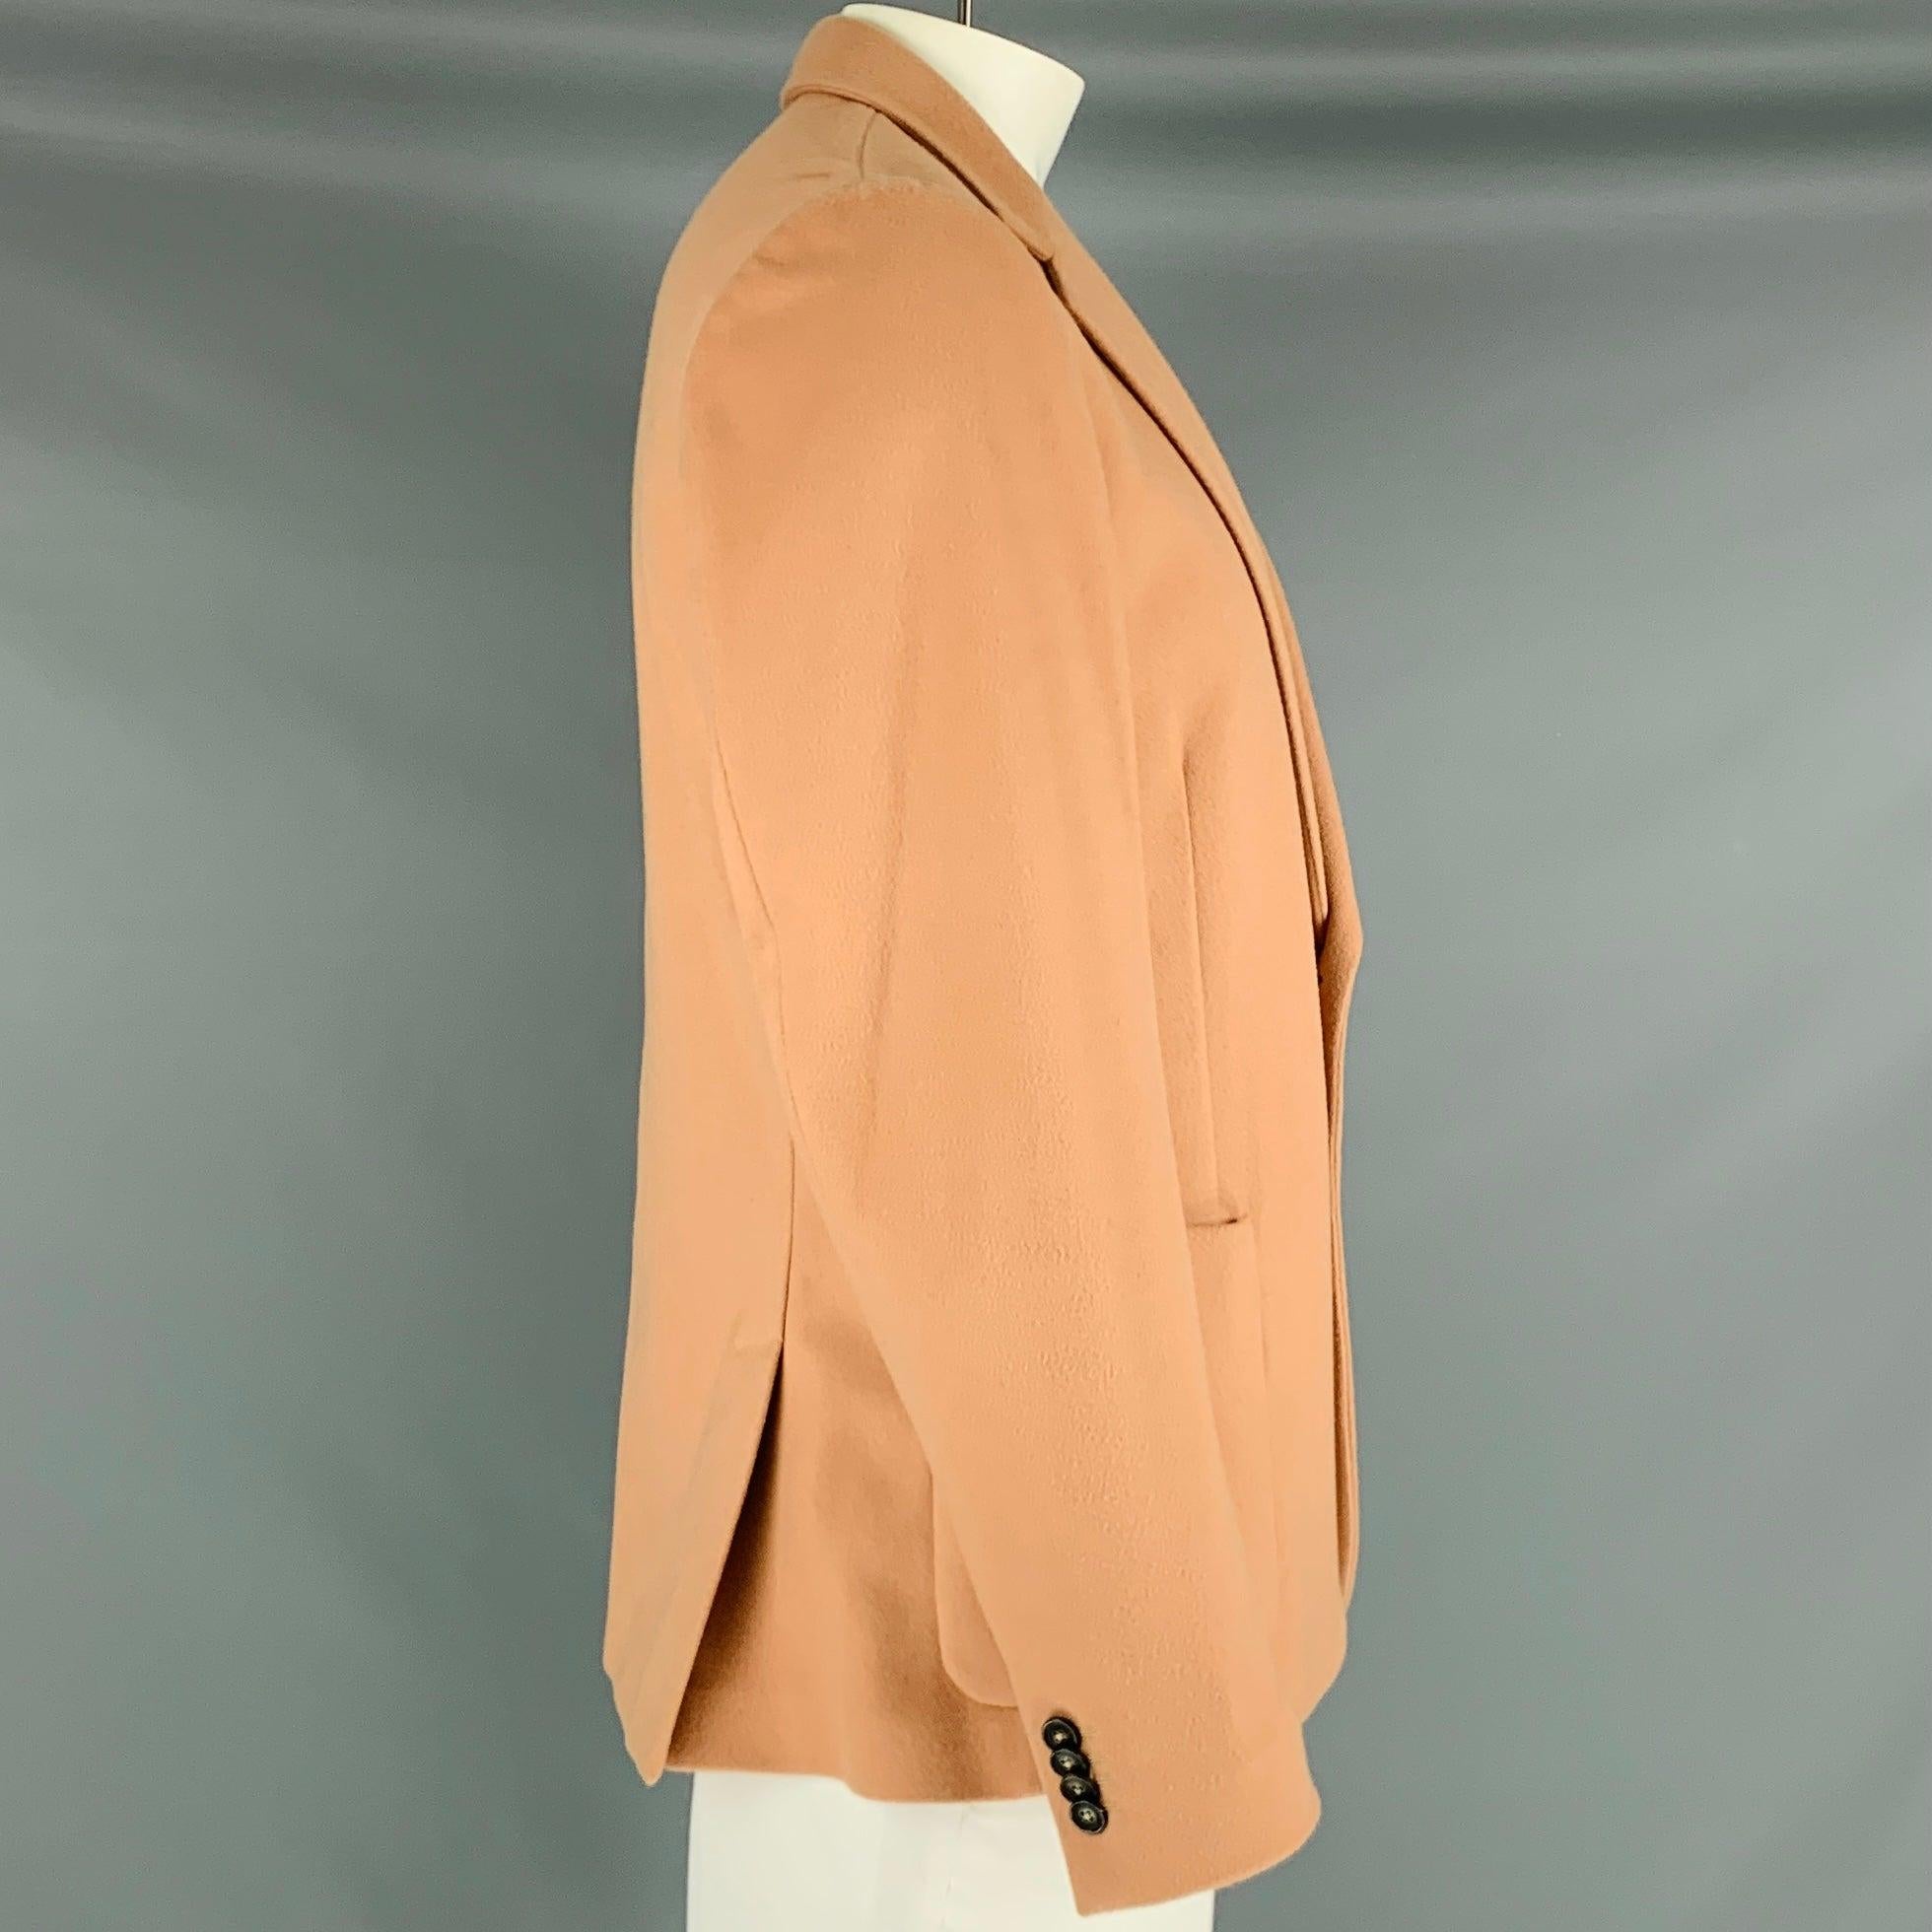 PAUL SMITH sport coat
in a rose wool cashmere blend fabric featuring notch lapel, double vented back, and double button closure. Made in Italy.Very Good Pre-Owned Condition.
Moderate signs of wear. 

Marked:   44 

Measurements: 
 
Shoulder: 17